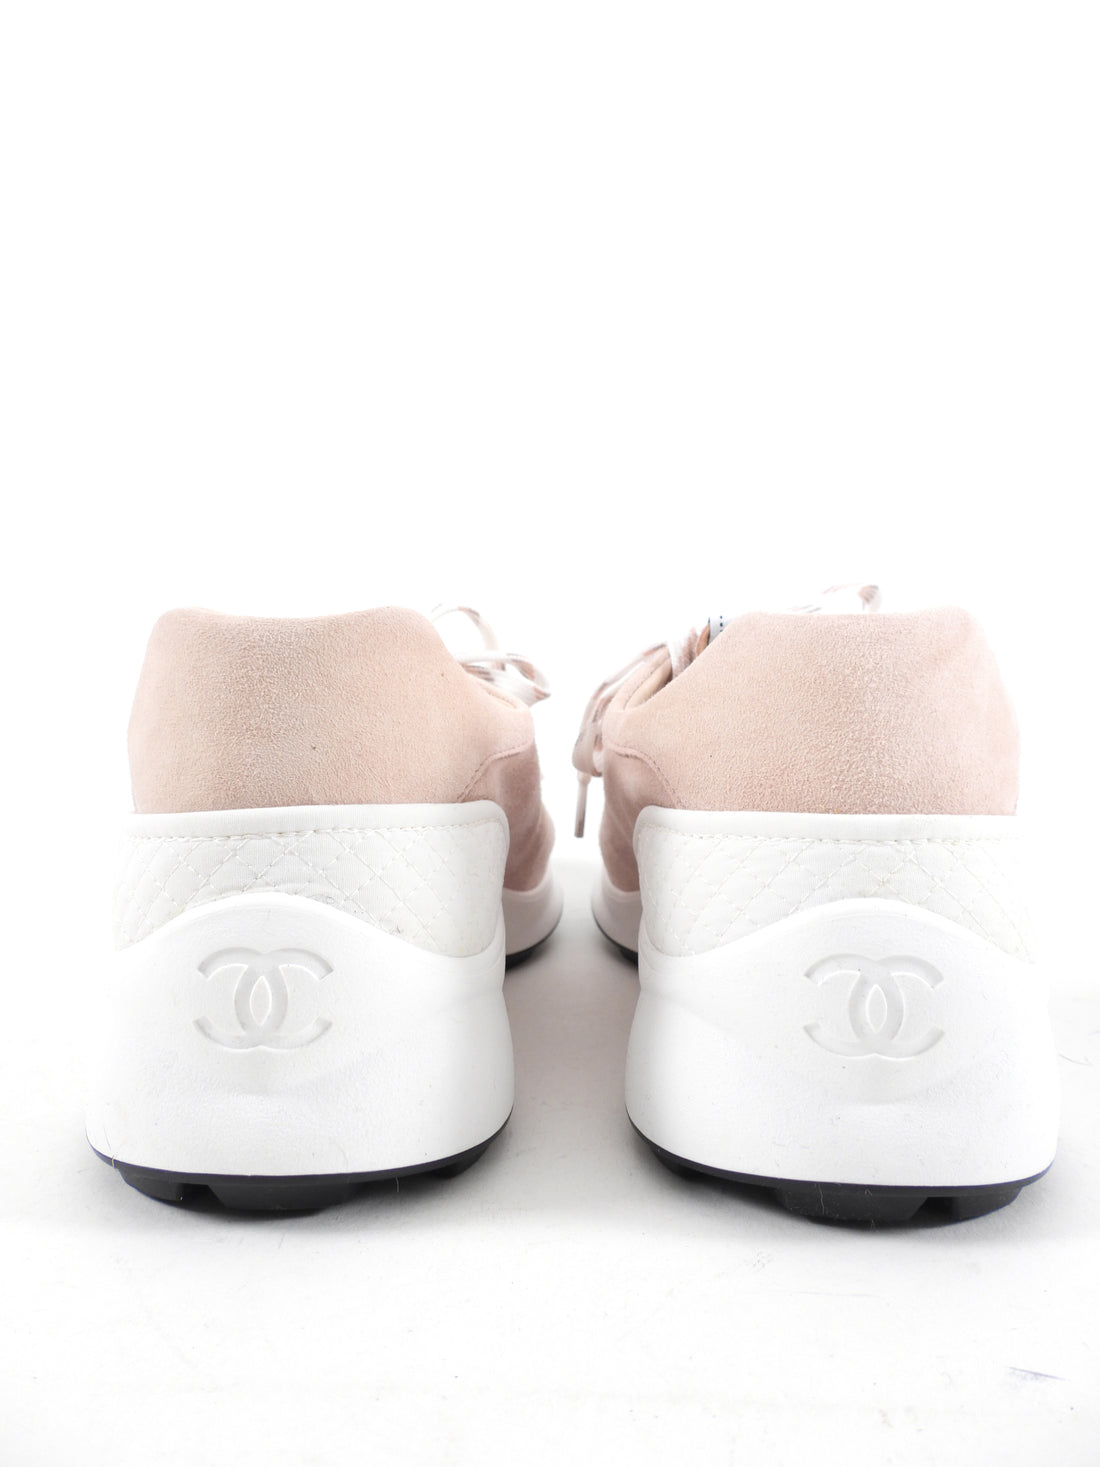 Chanel G39074 Light Pink Suede CC Sneakers - 40.5 / 39.5